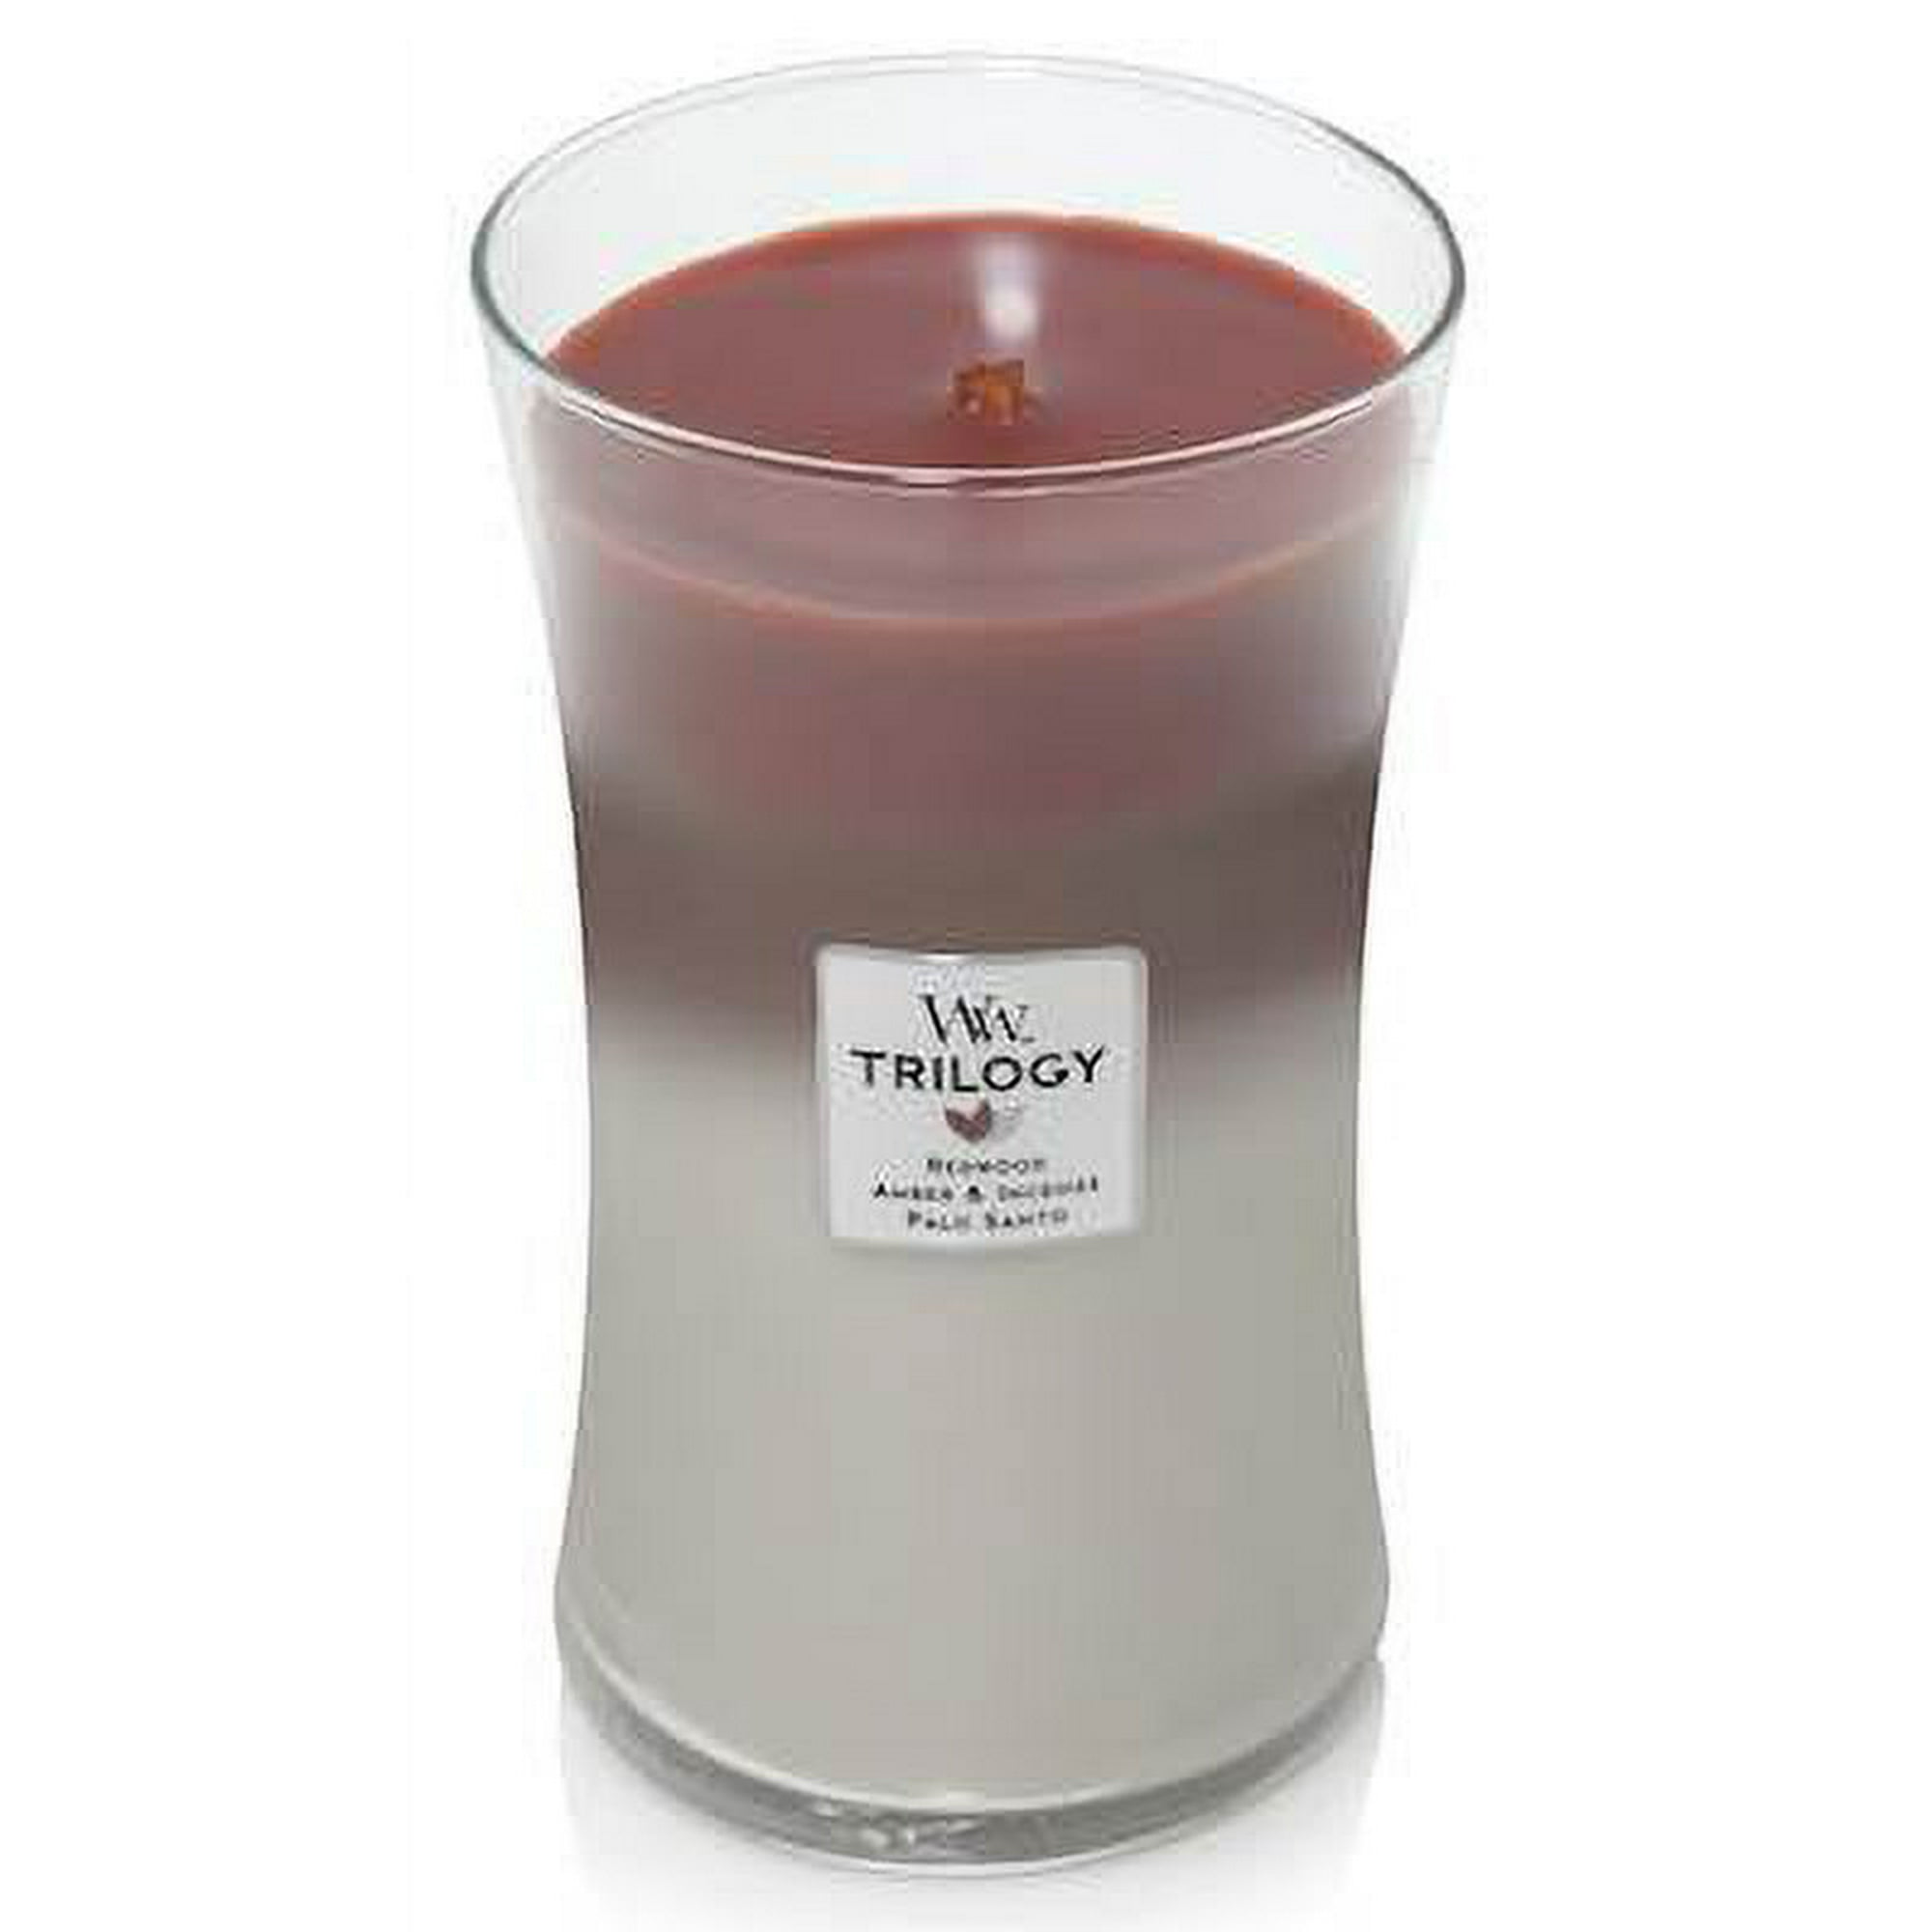 Woodwick: Warm Woods Trilogy candle – The Scented Library